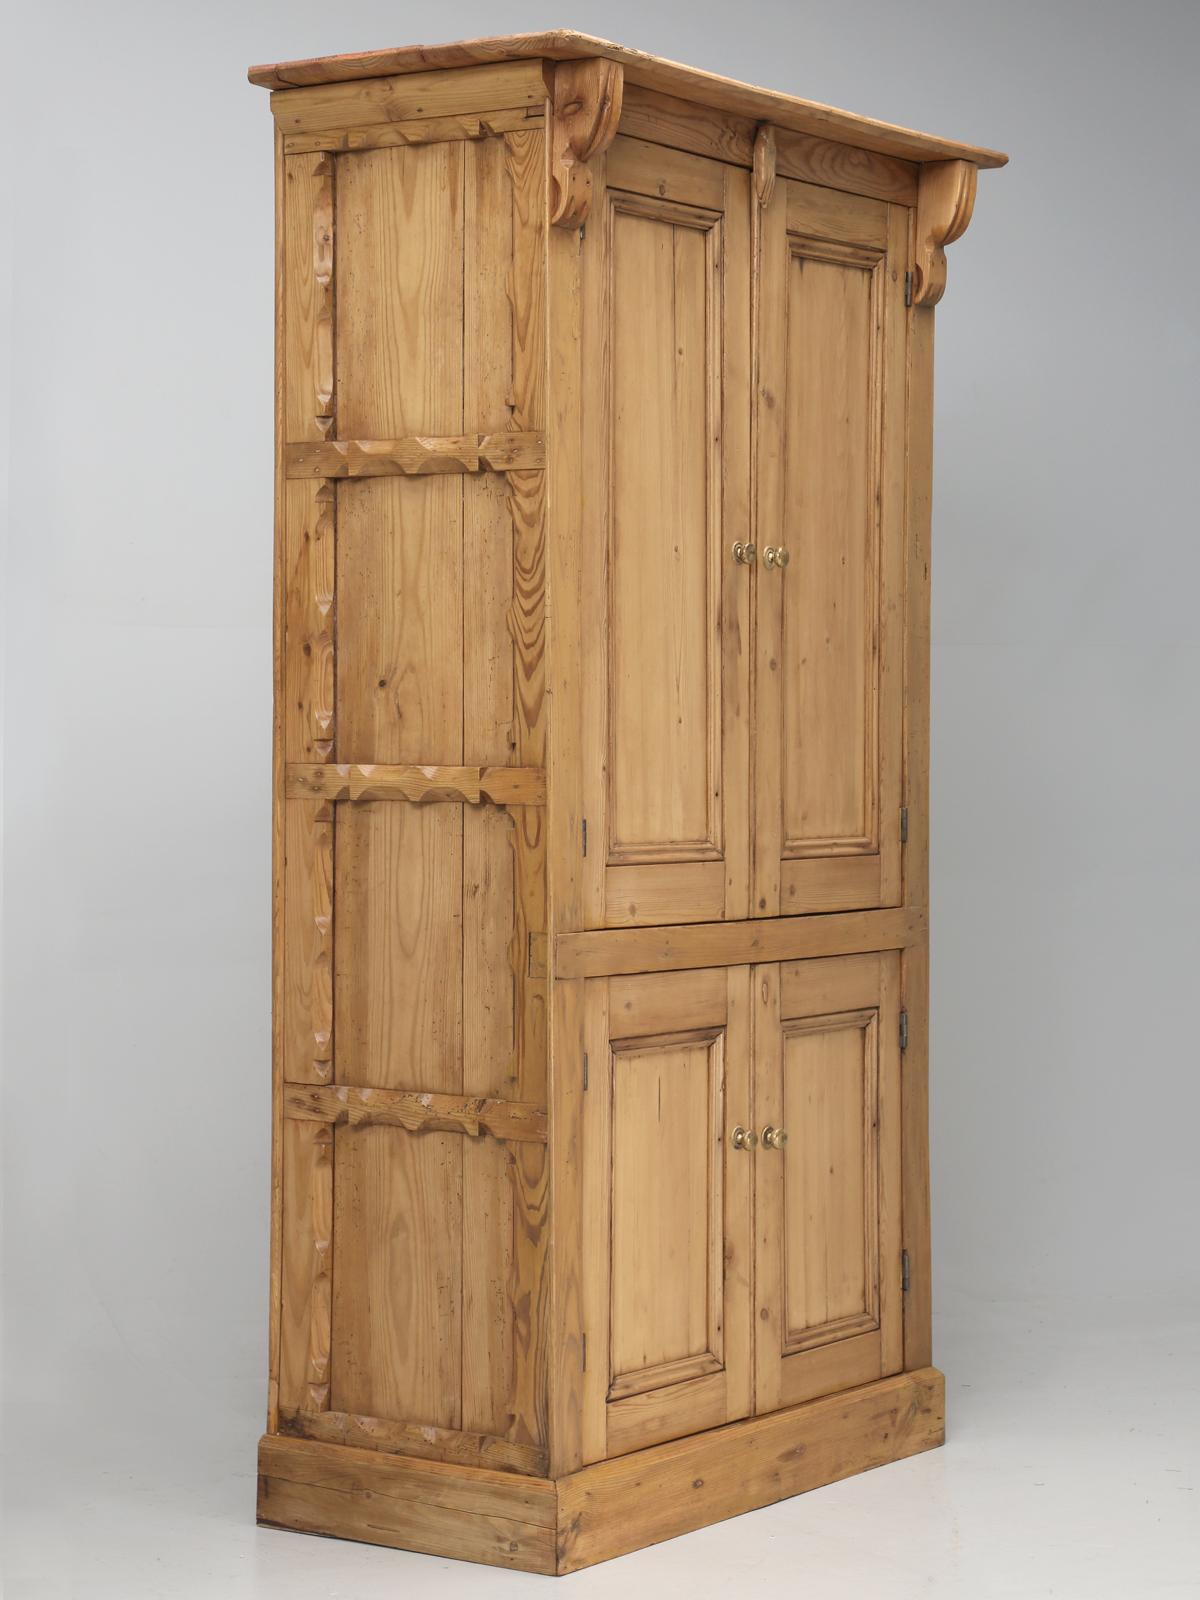 One of our absolute, all-time favorite pieces of Antique Irish pine Folk Art and we purchased this Irish pine cabinet, or cupboard in England over 20 years ago, in the county of York. Wonderfully detailed sides, in a technique that I have rarely